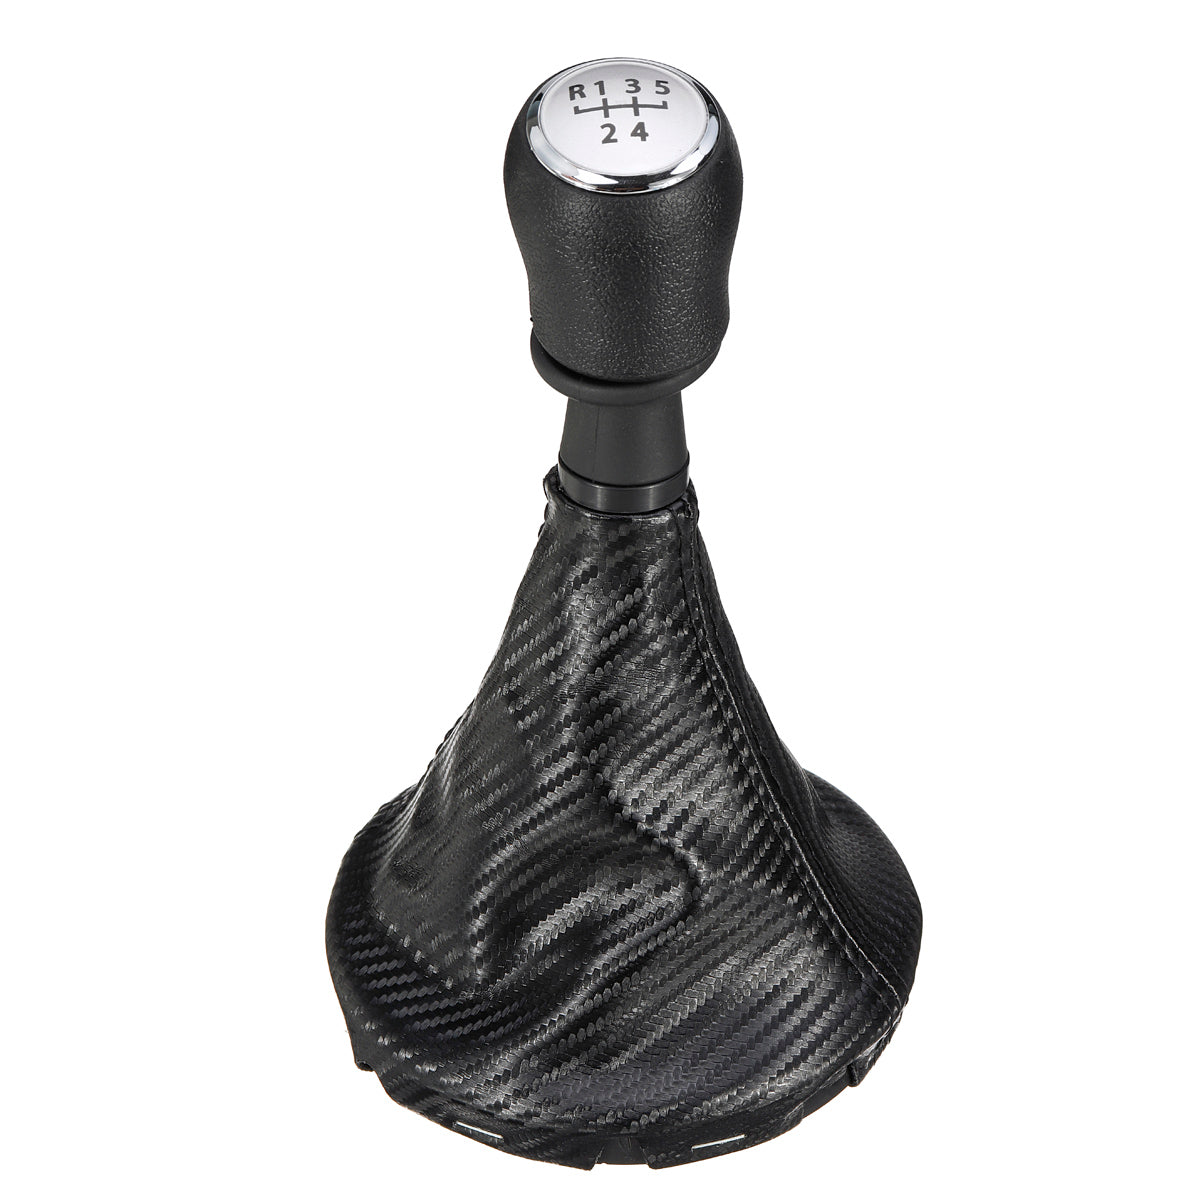 Dark Slate Gray 5/6 Speed Gear Shift Knob with Carbon Fiber Leather Gaiter Boot Cover For VW Transporter